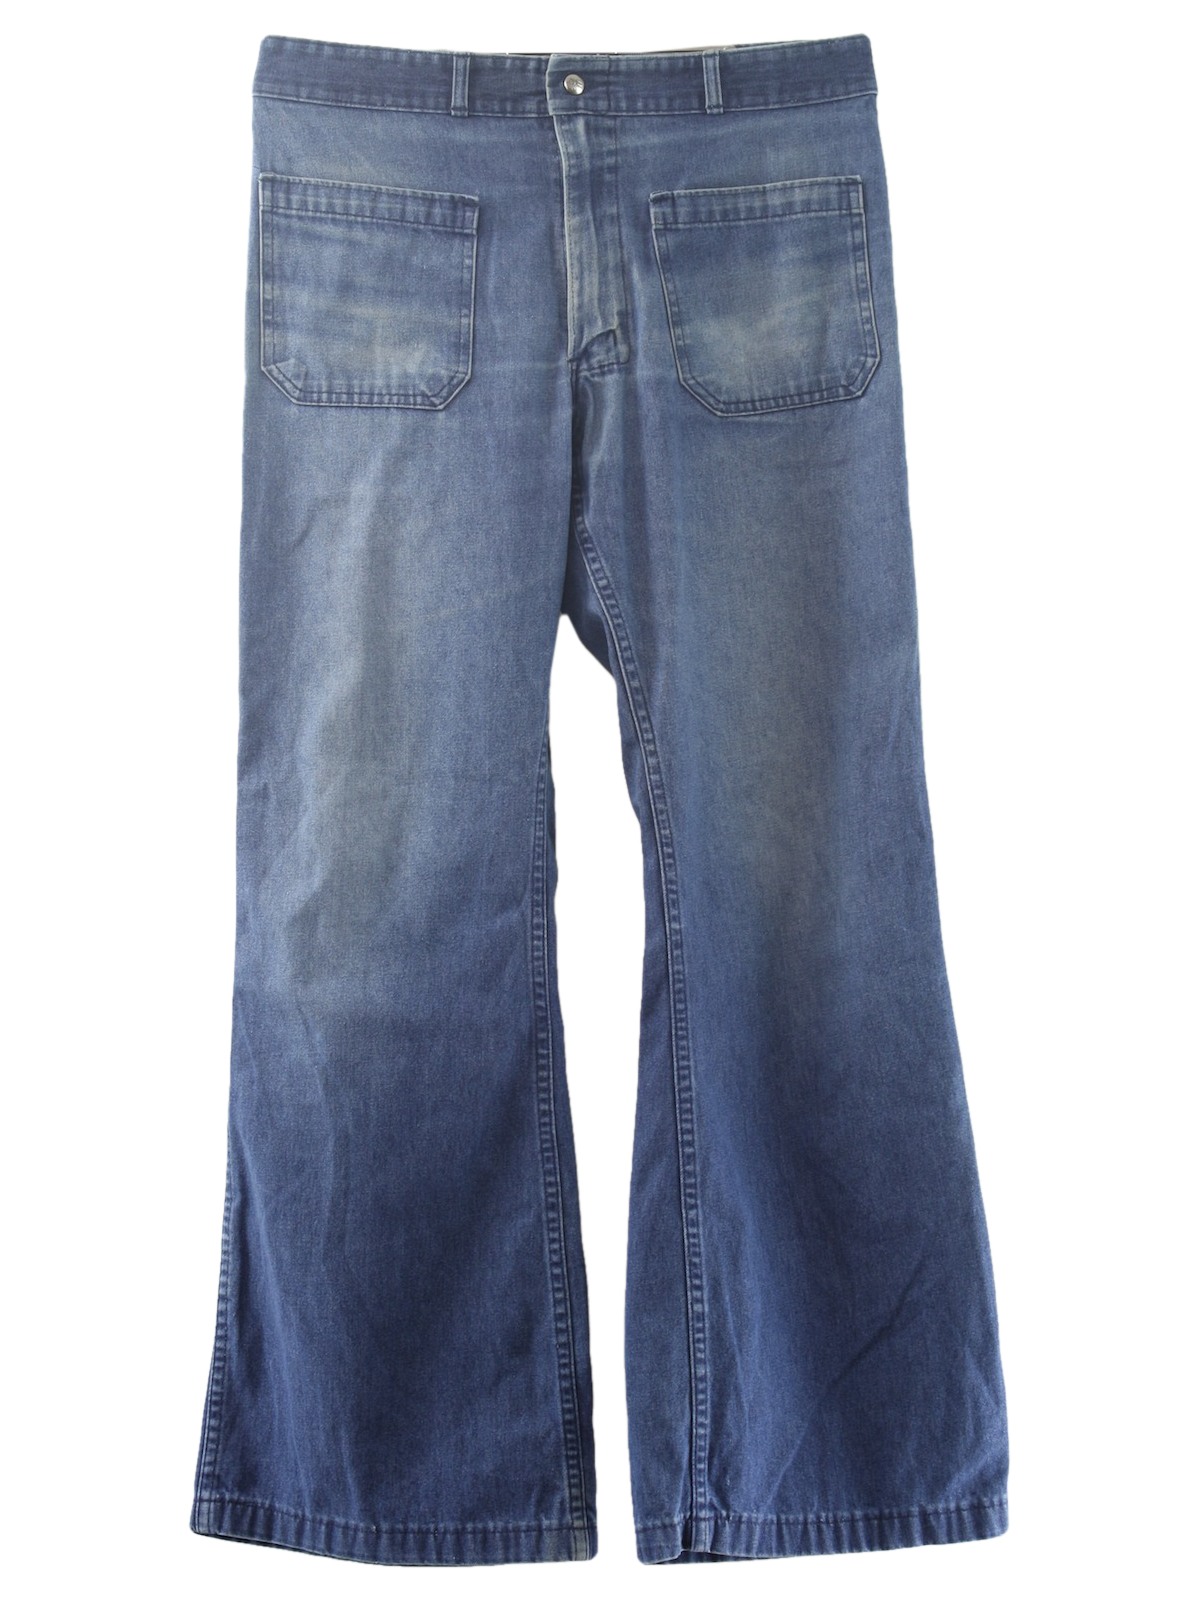 Retro Seventies Bellbottom Pants: 70s -Seafarer- Mens moderately faded ...